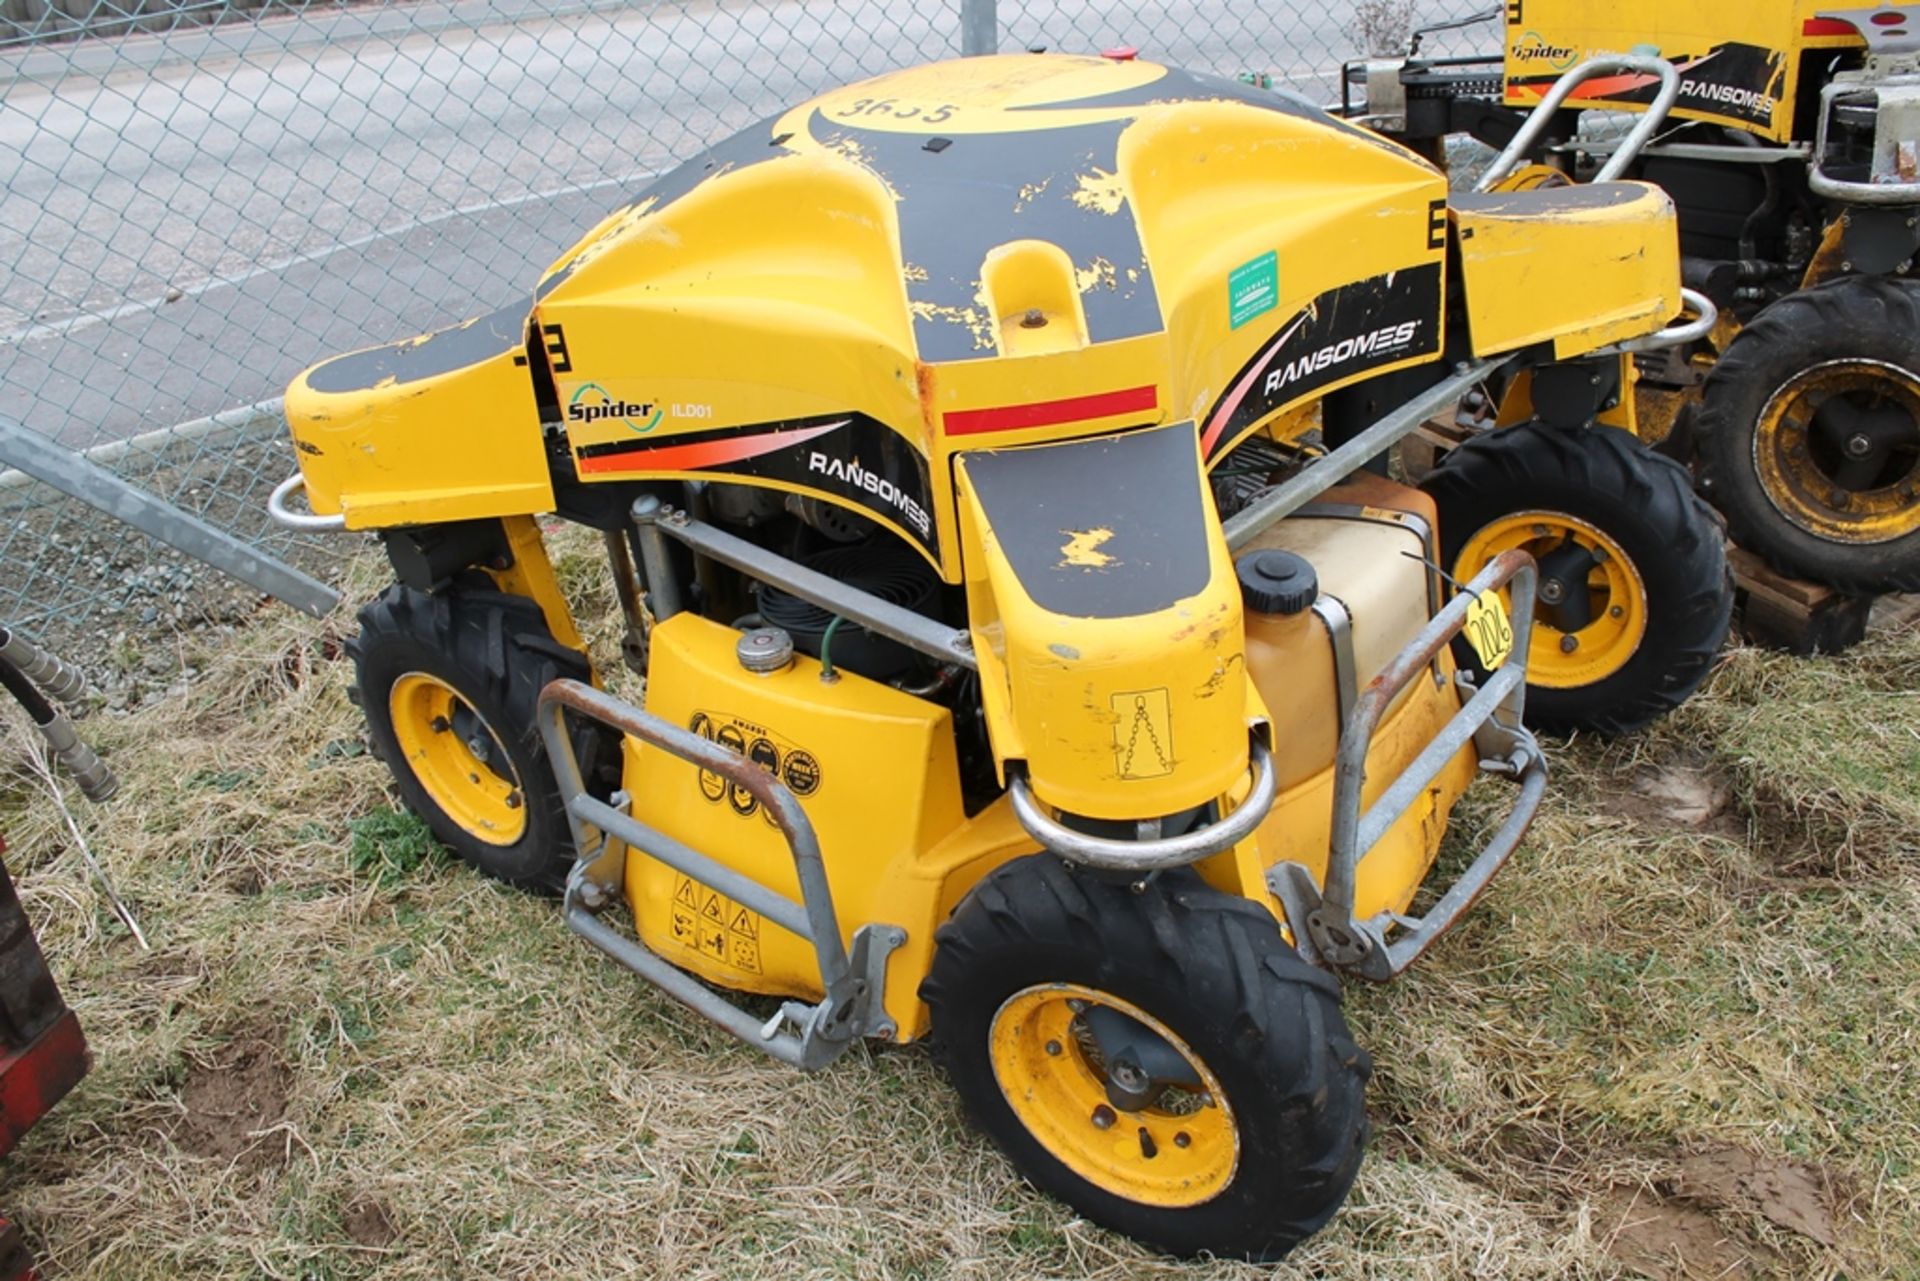 RANSOME SPIDER MOWERS, 1 WORKING 1 FOR SPARES, CONTROLS IN PC